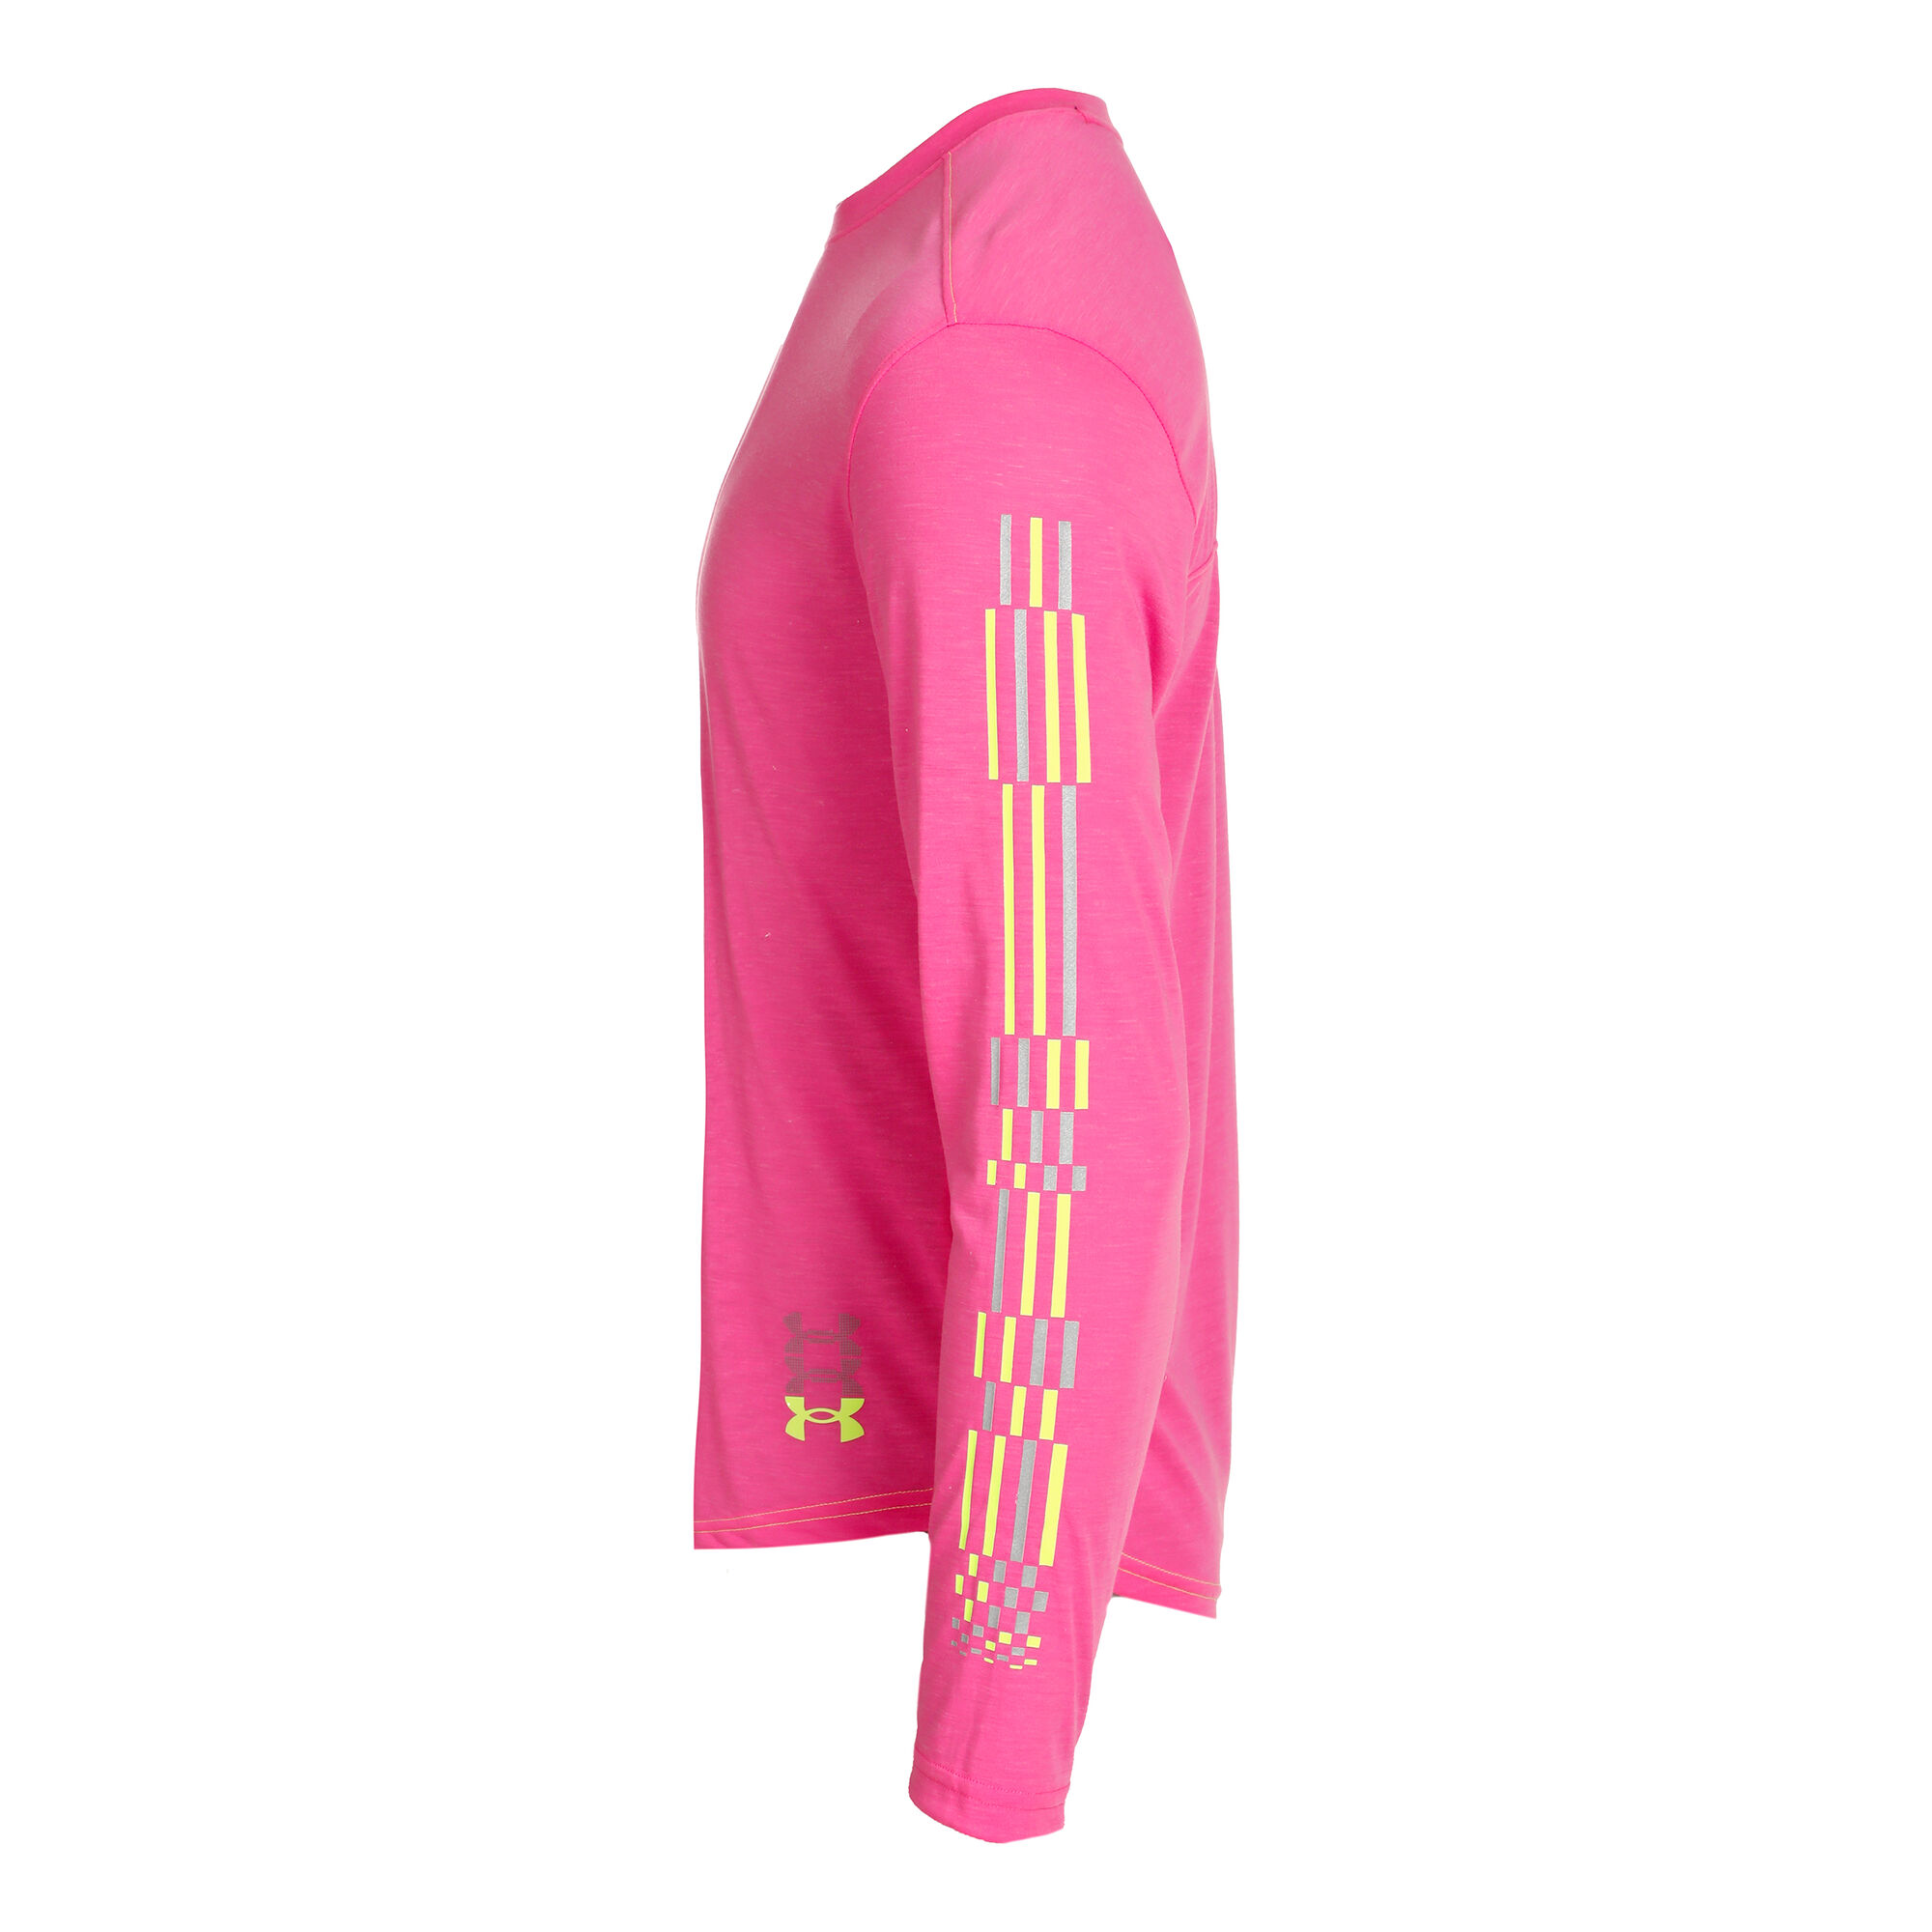 Under Armour Women's Pindot Open Back Long Sleeve, Flushed Pink